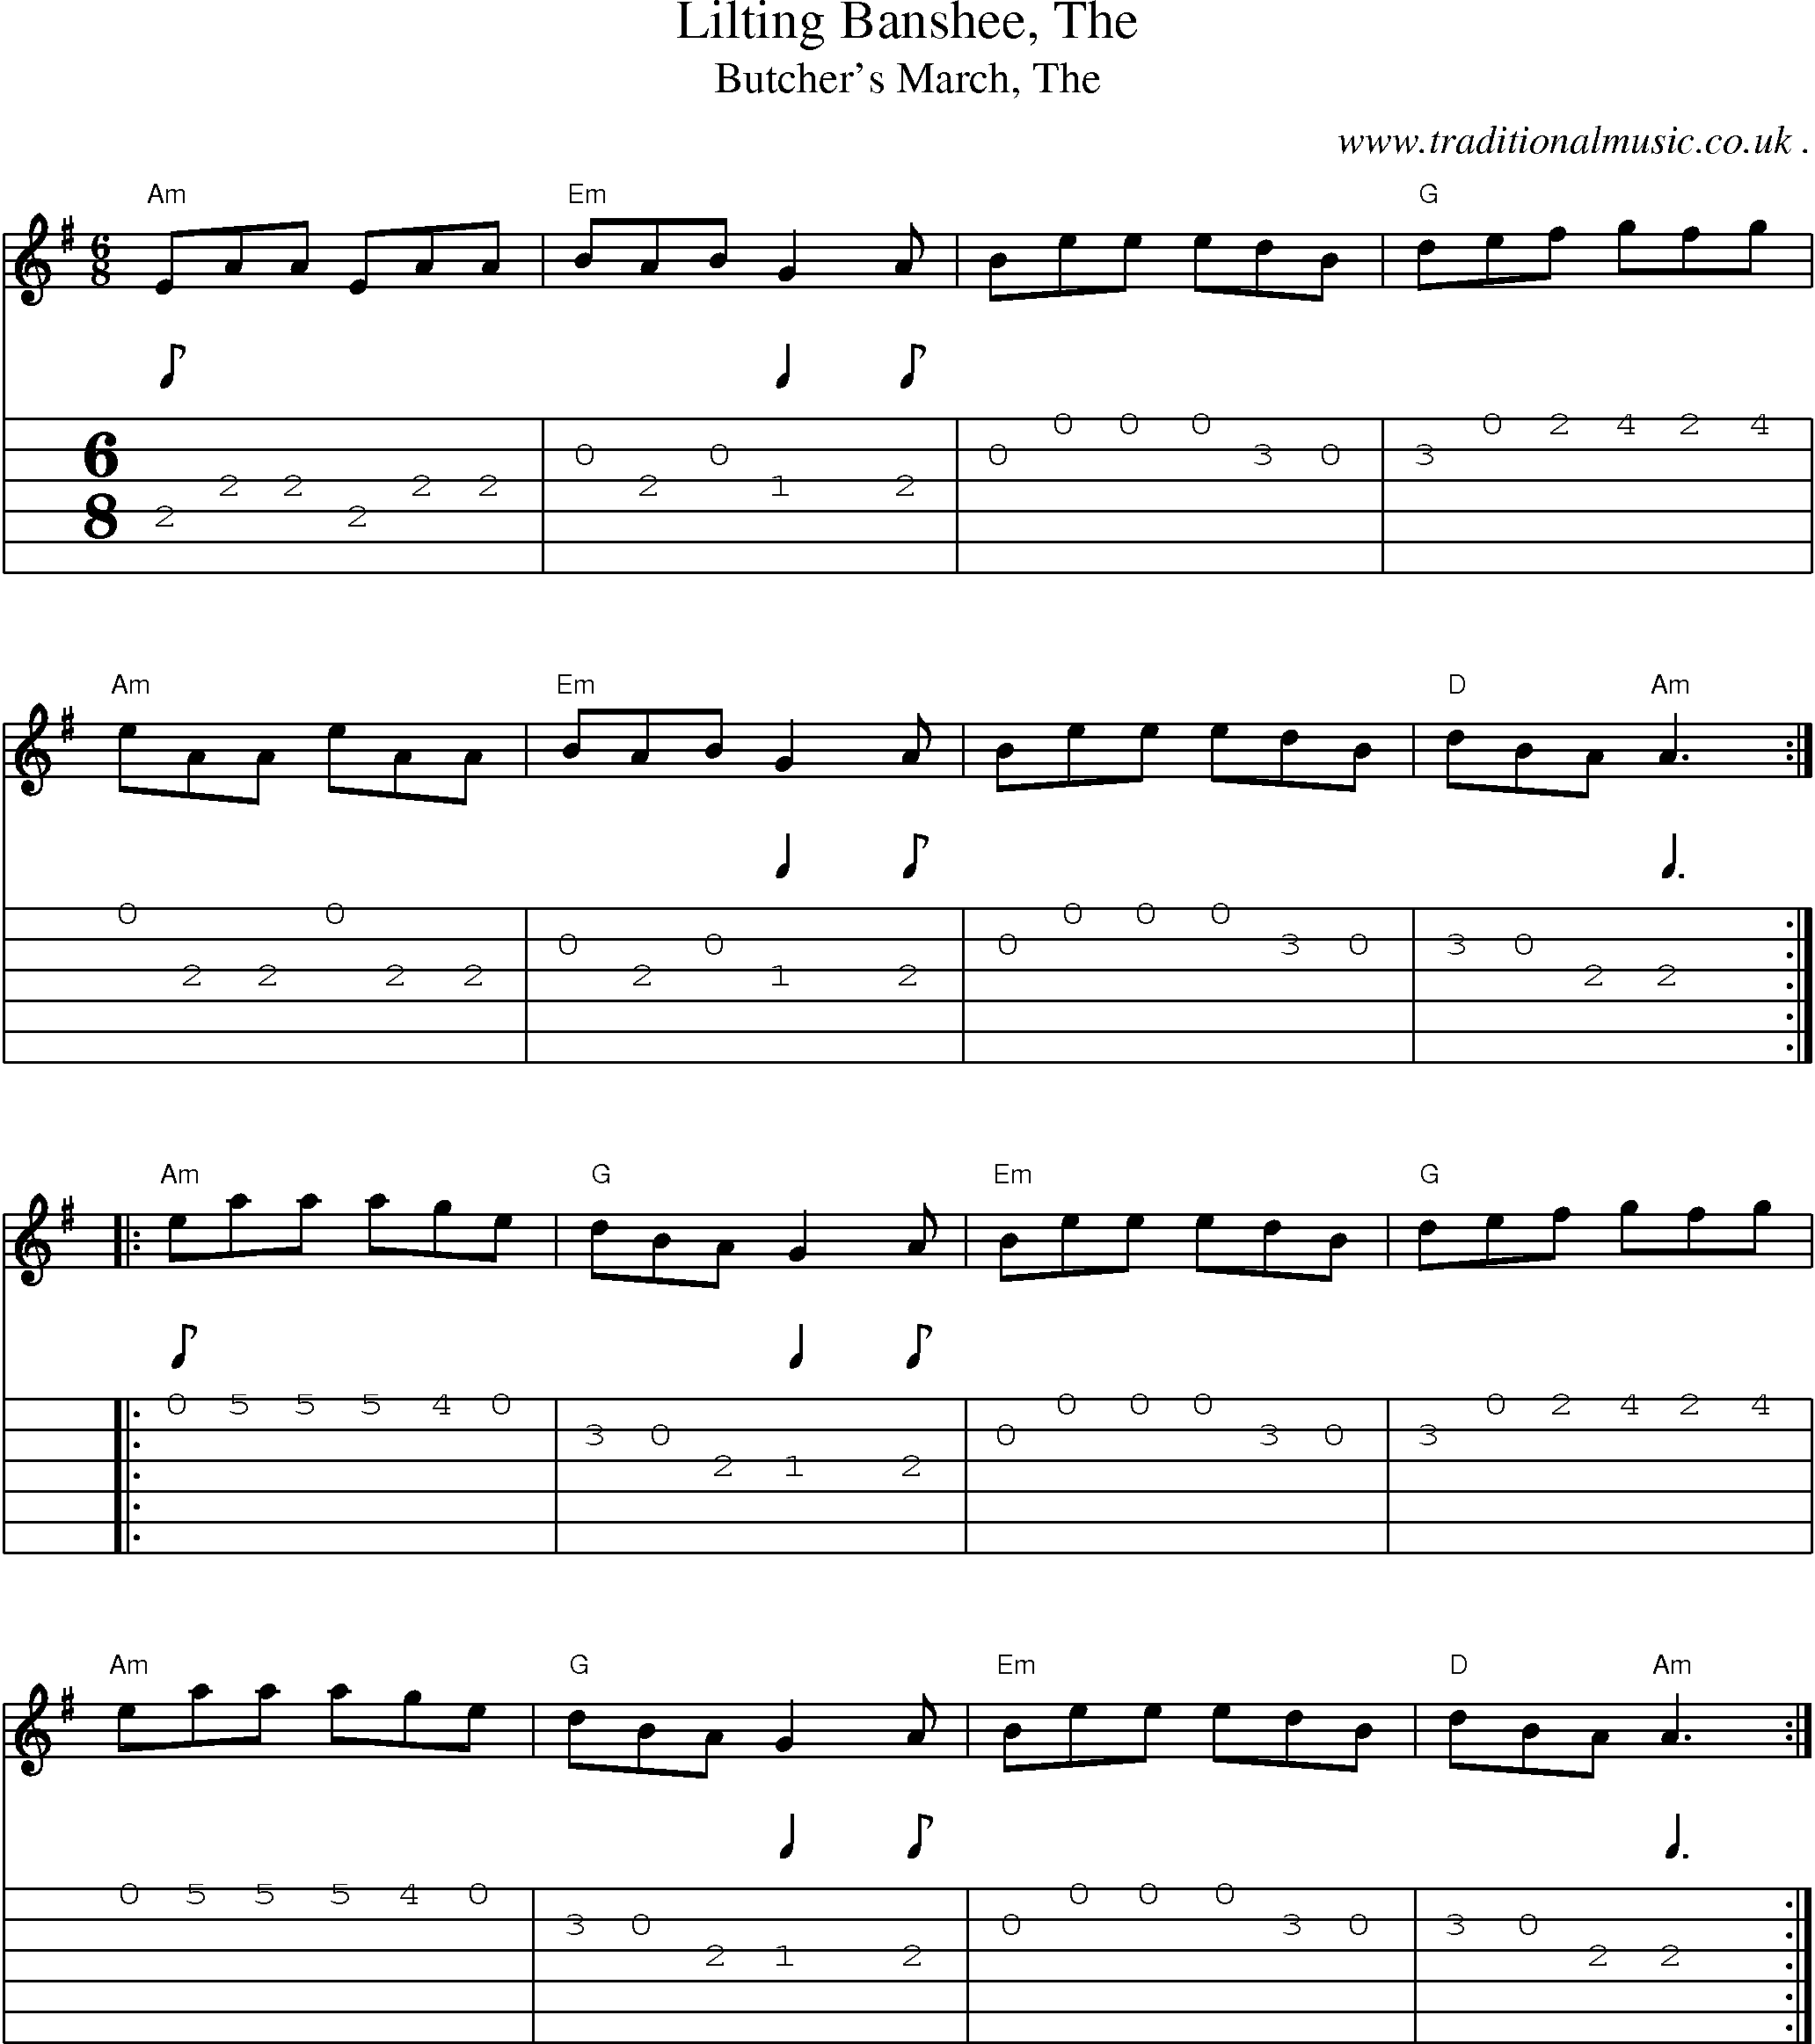 Music Score and Guitar Tabs for Lilting Banshee The